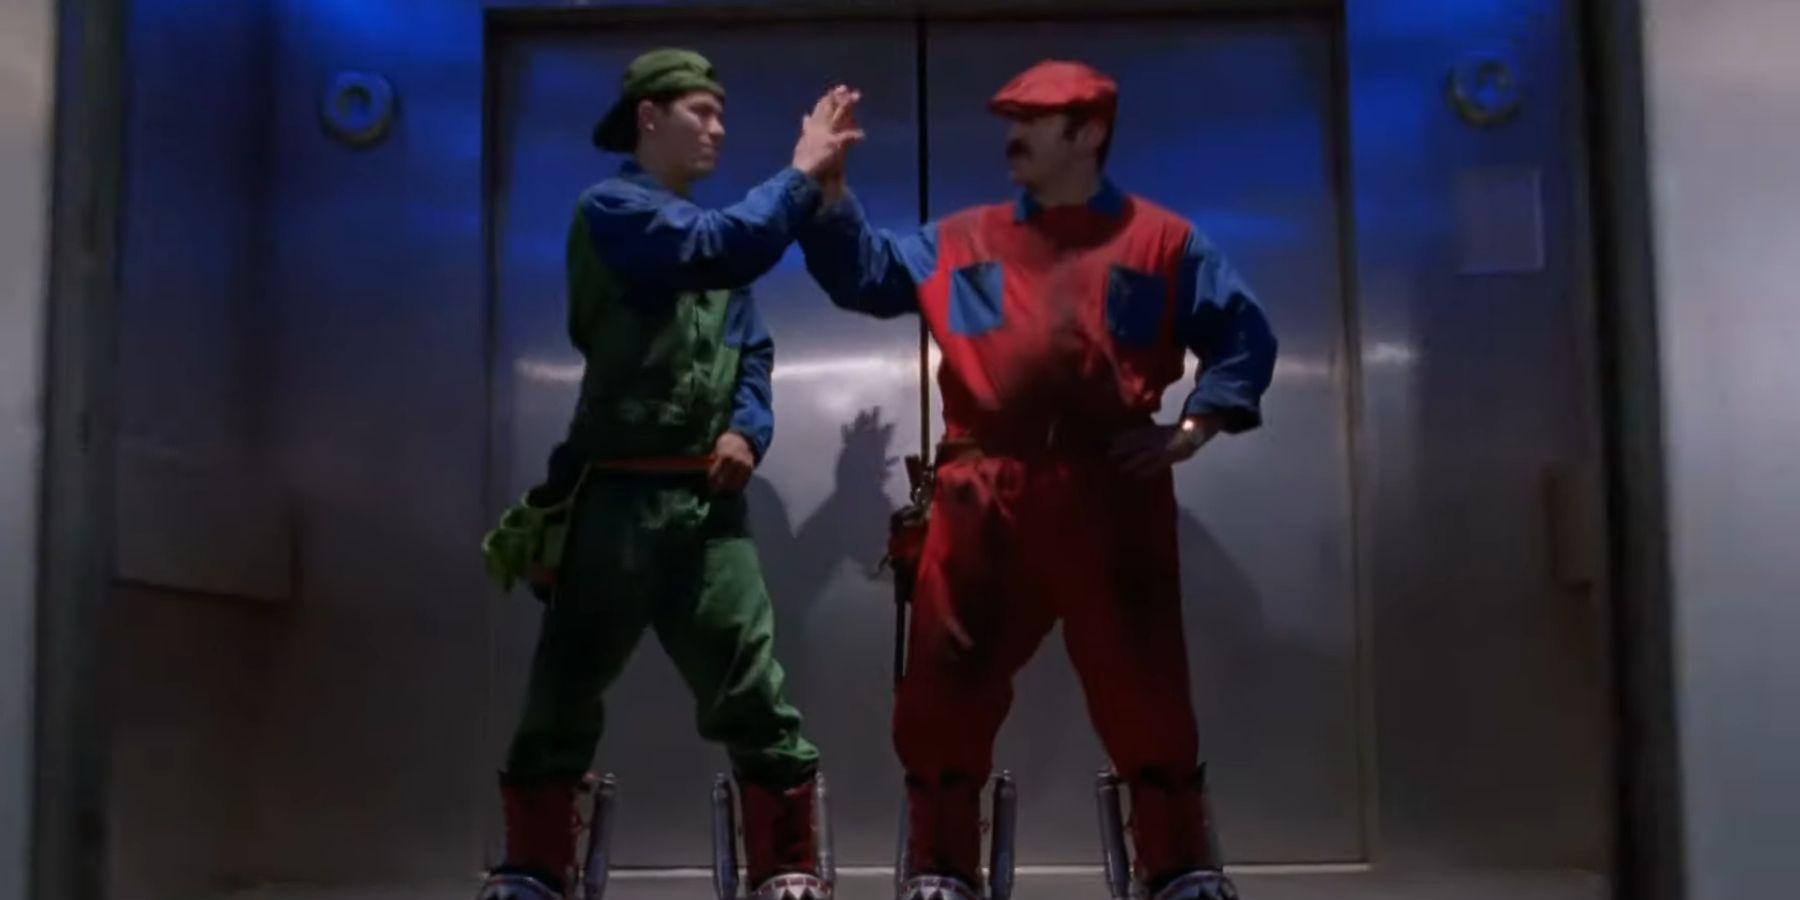 Mario and Luigi in their iconic outfits in Super Mario Bros 1993